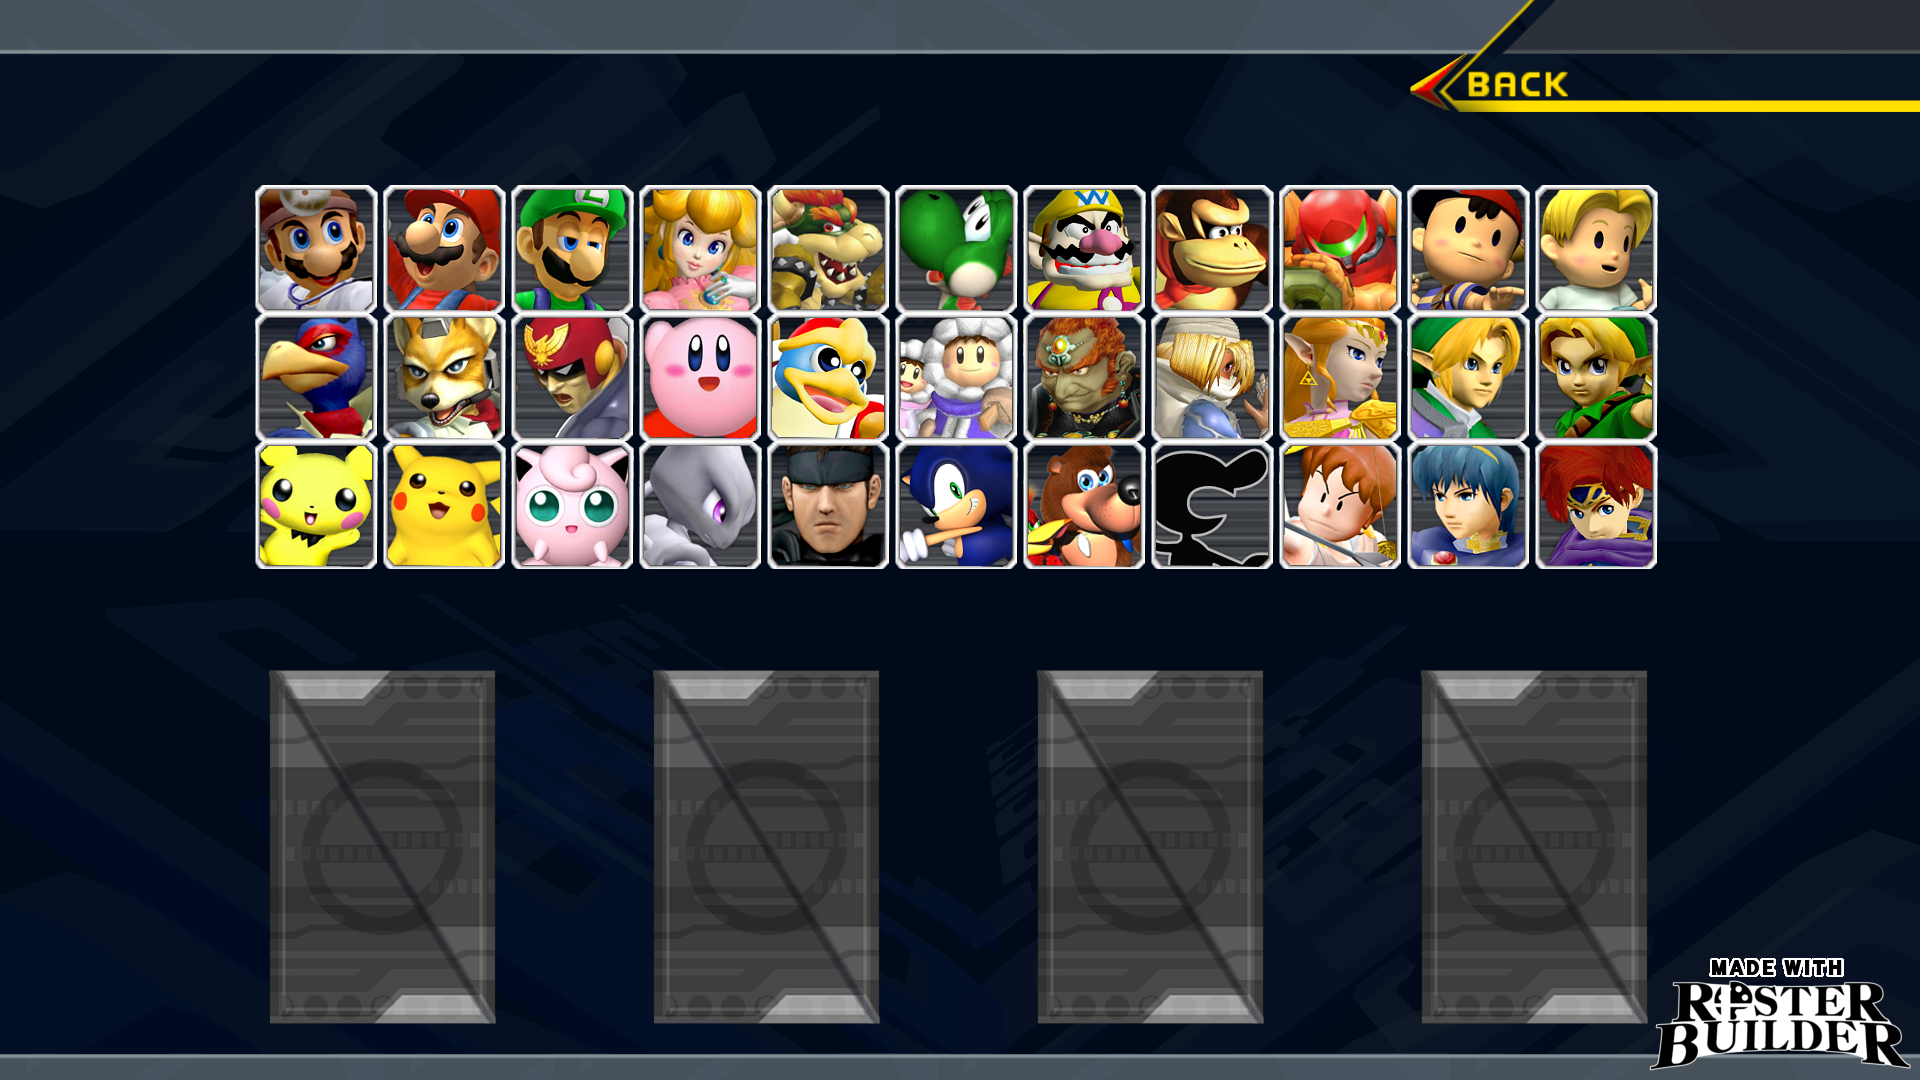 Super Smash Bros. 64 Character Roster (My Take) by WarchieUnited on  DeviantArt